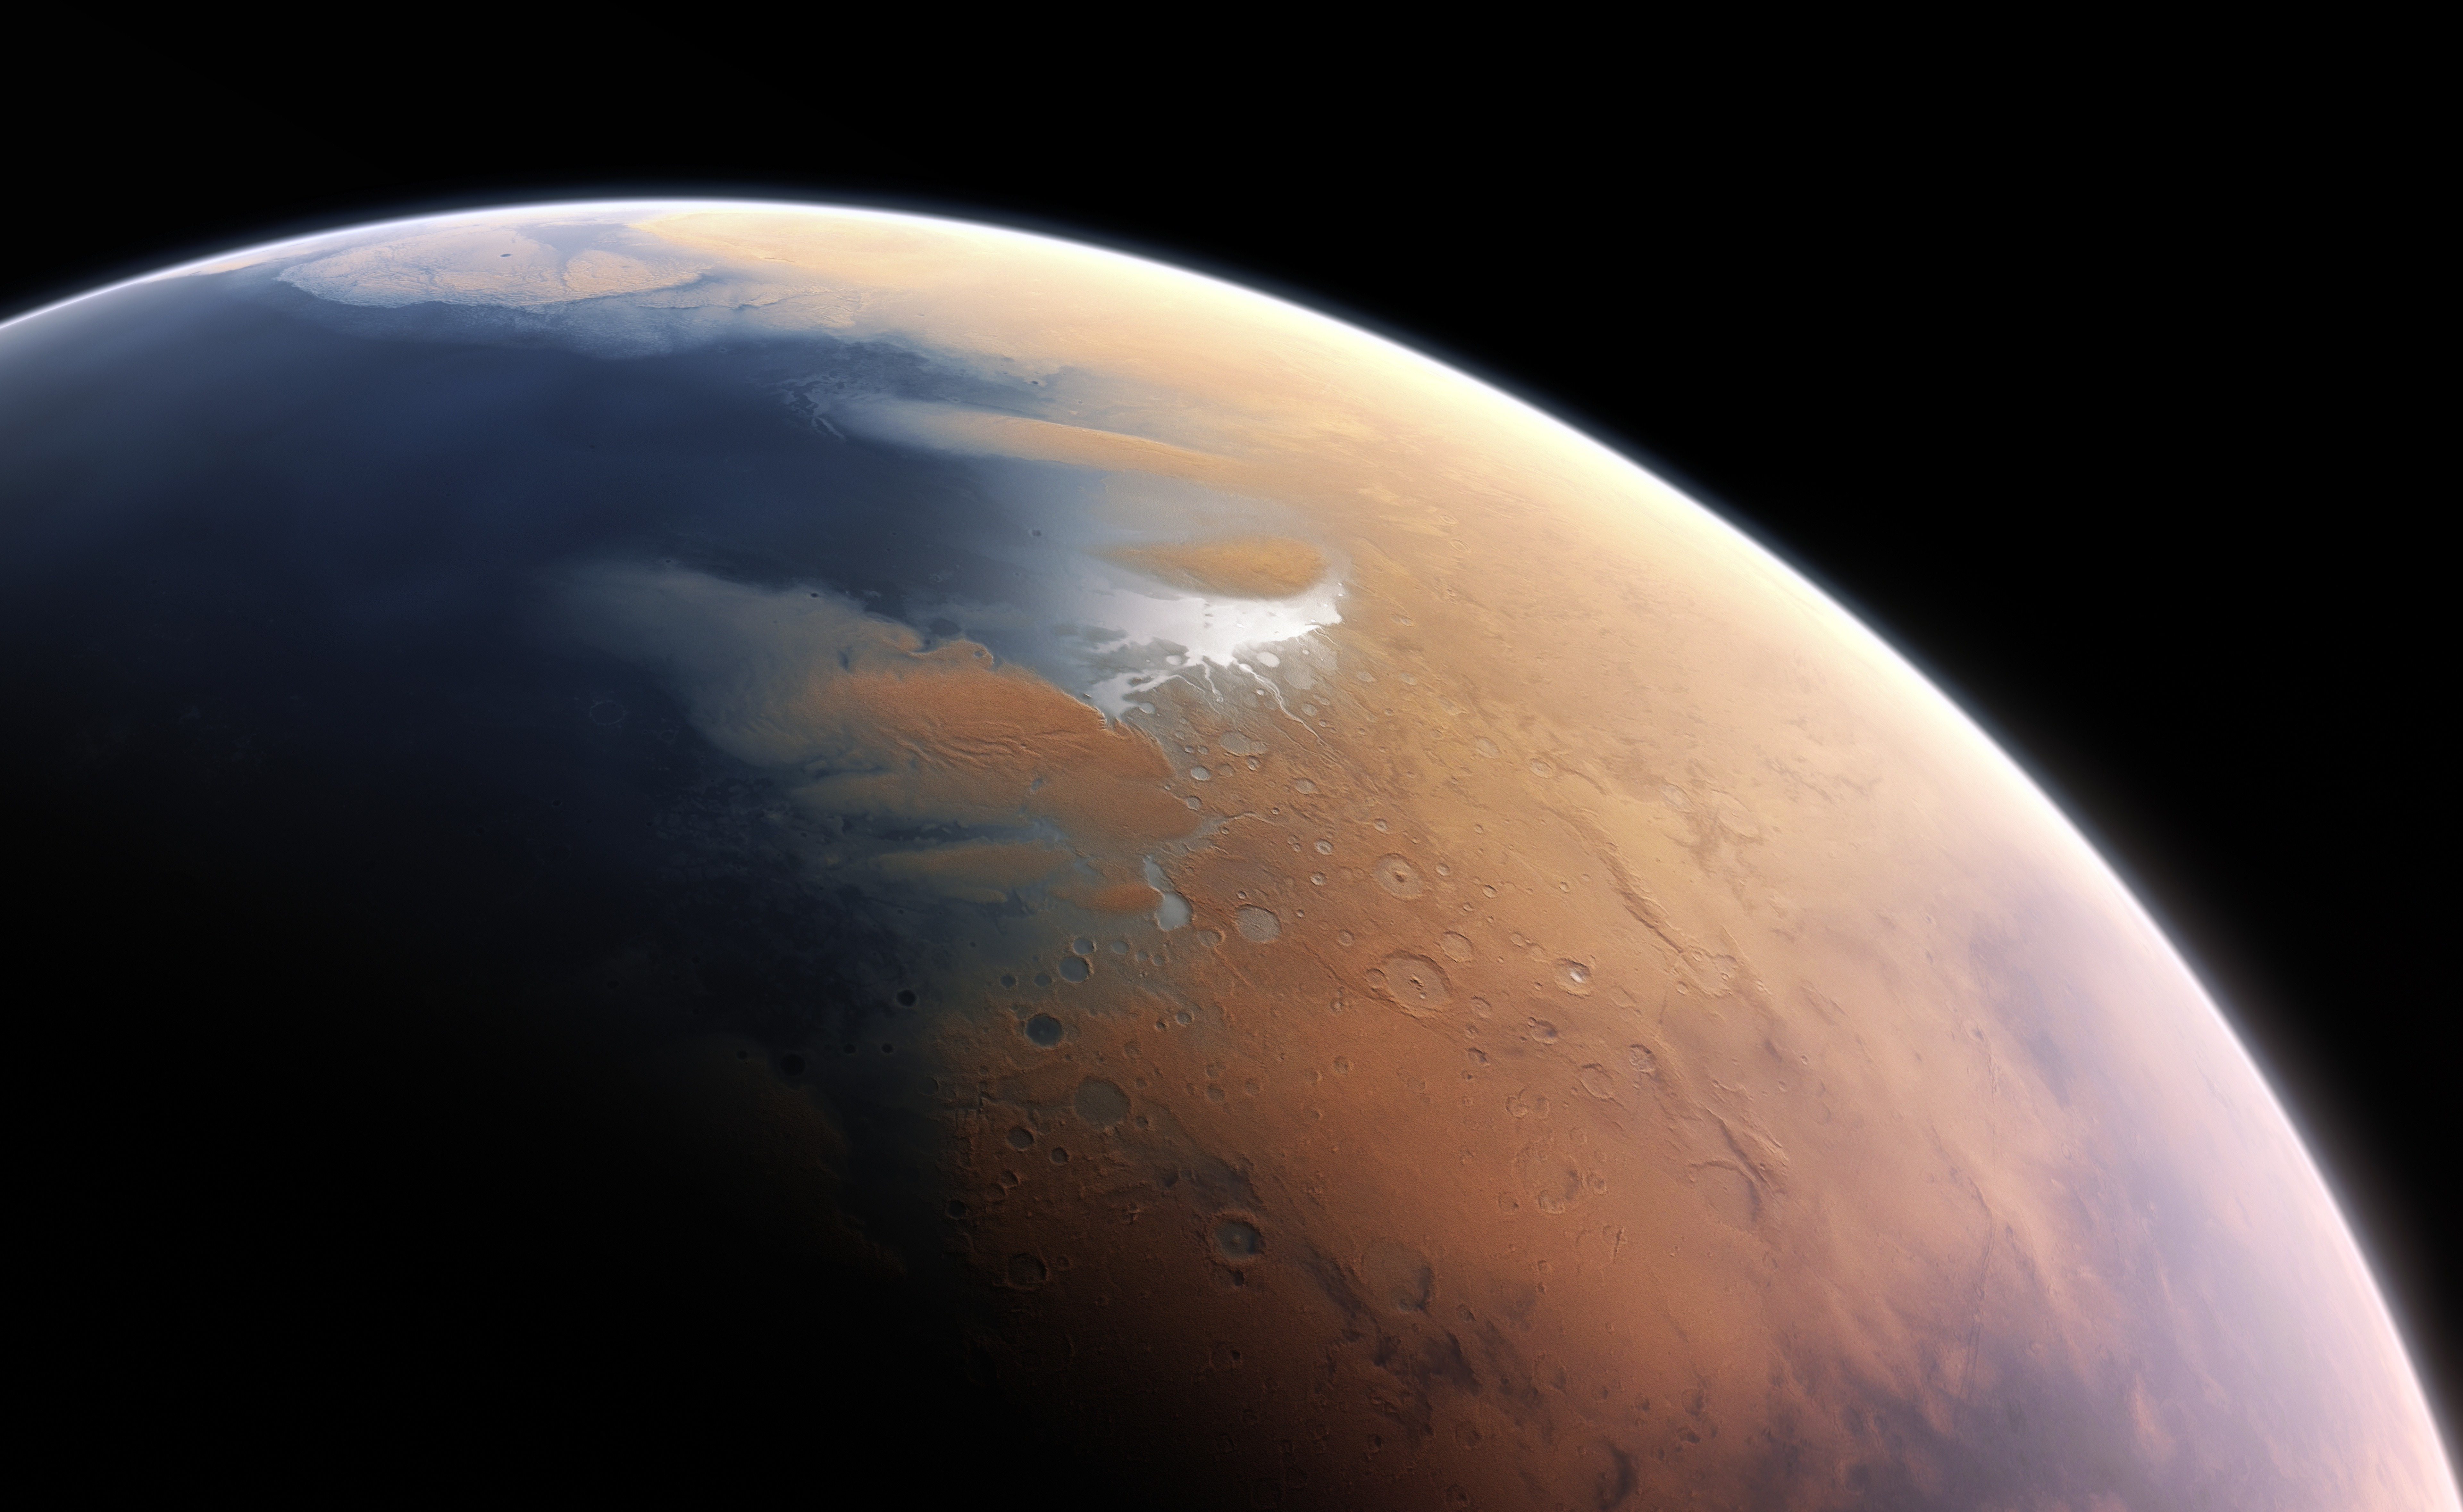 Download wallpaper 938x1668 mars planet space brown surface iphone  876s6 for parallax hd background